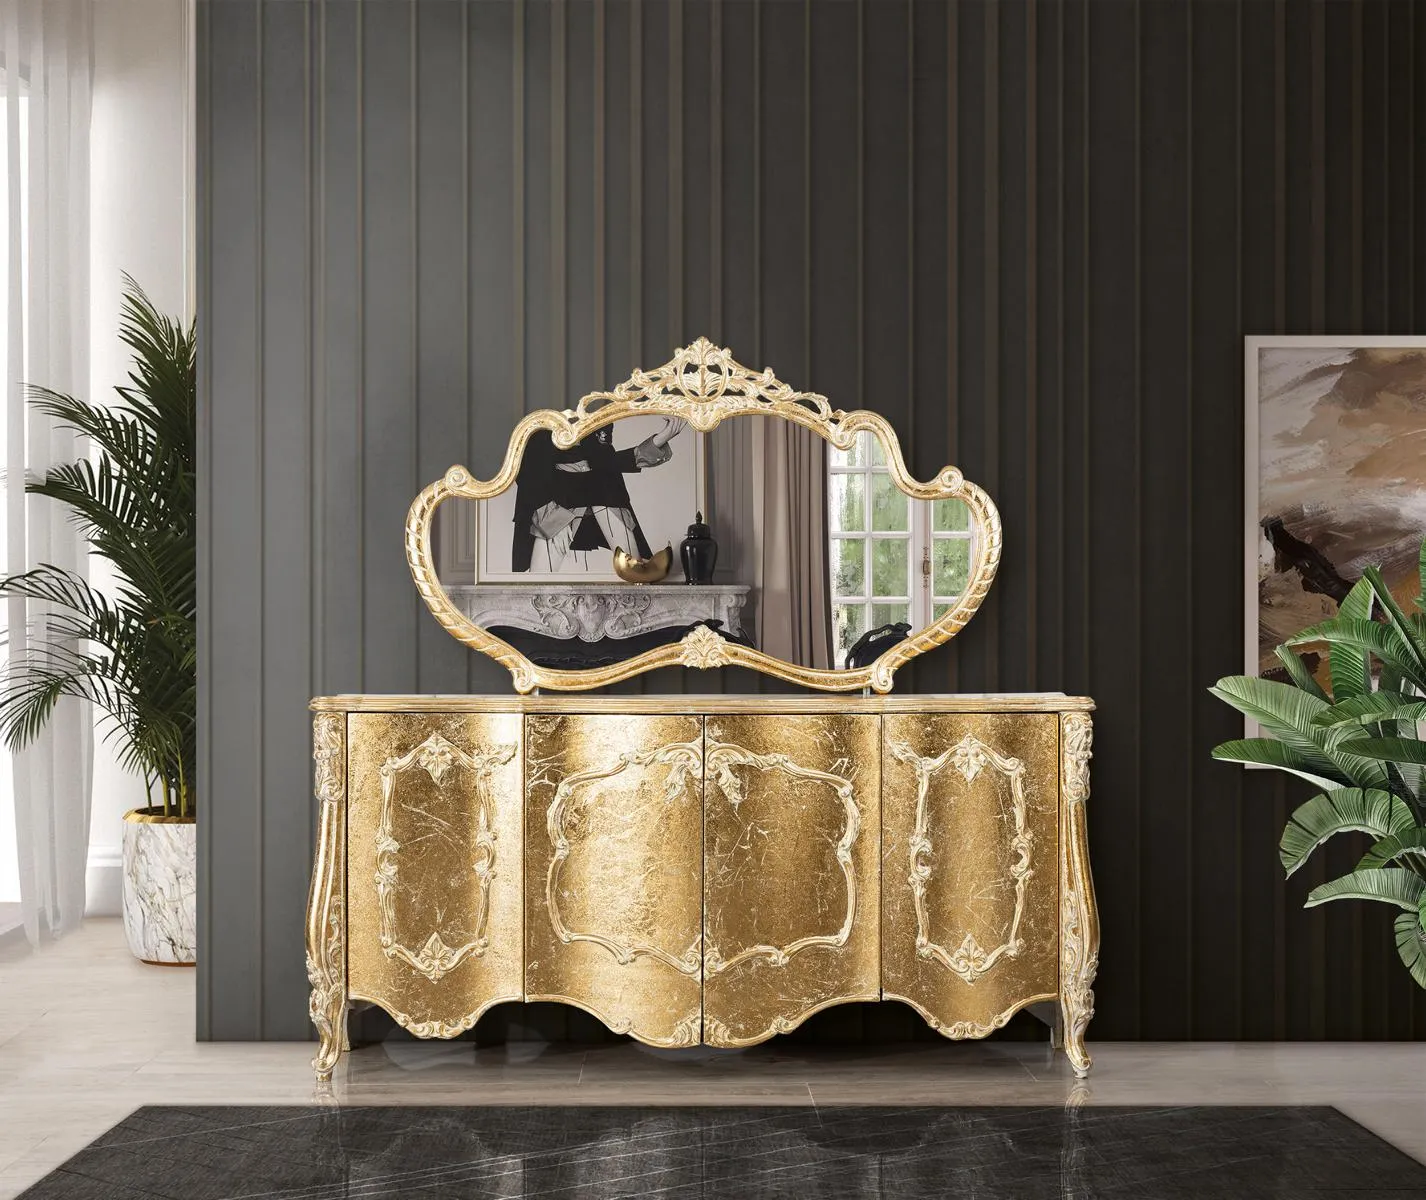 Sideboard mirror luxury group chest of drawers set cabinet gold